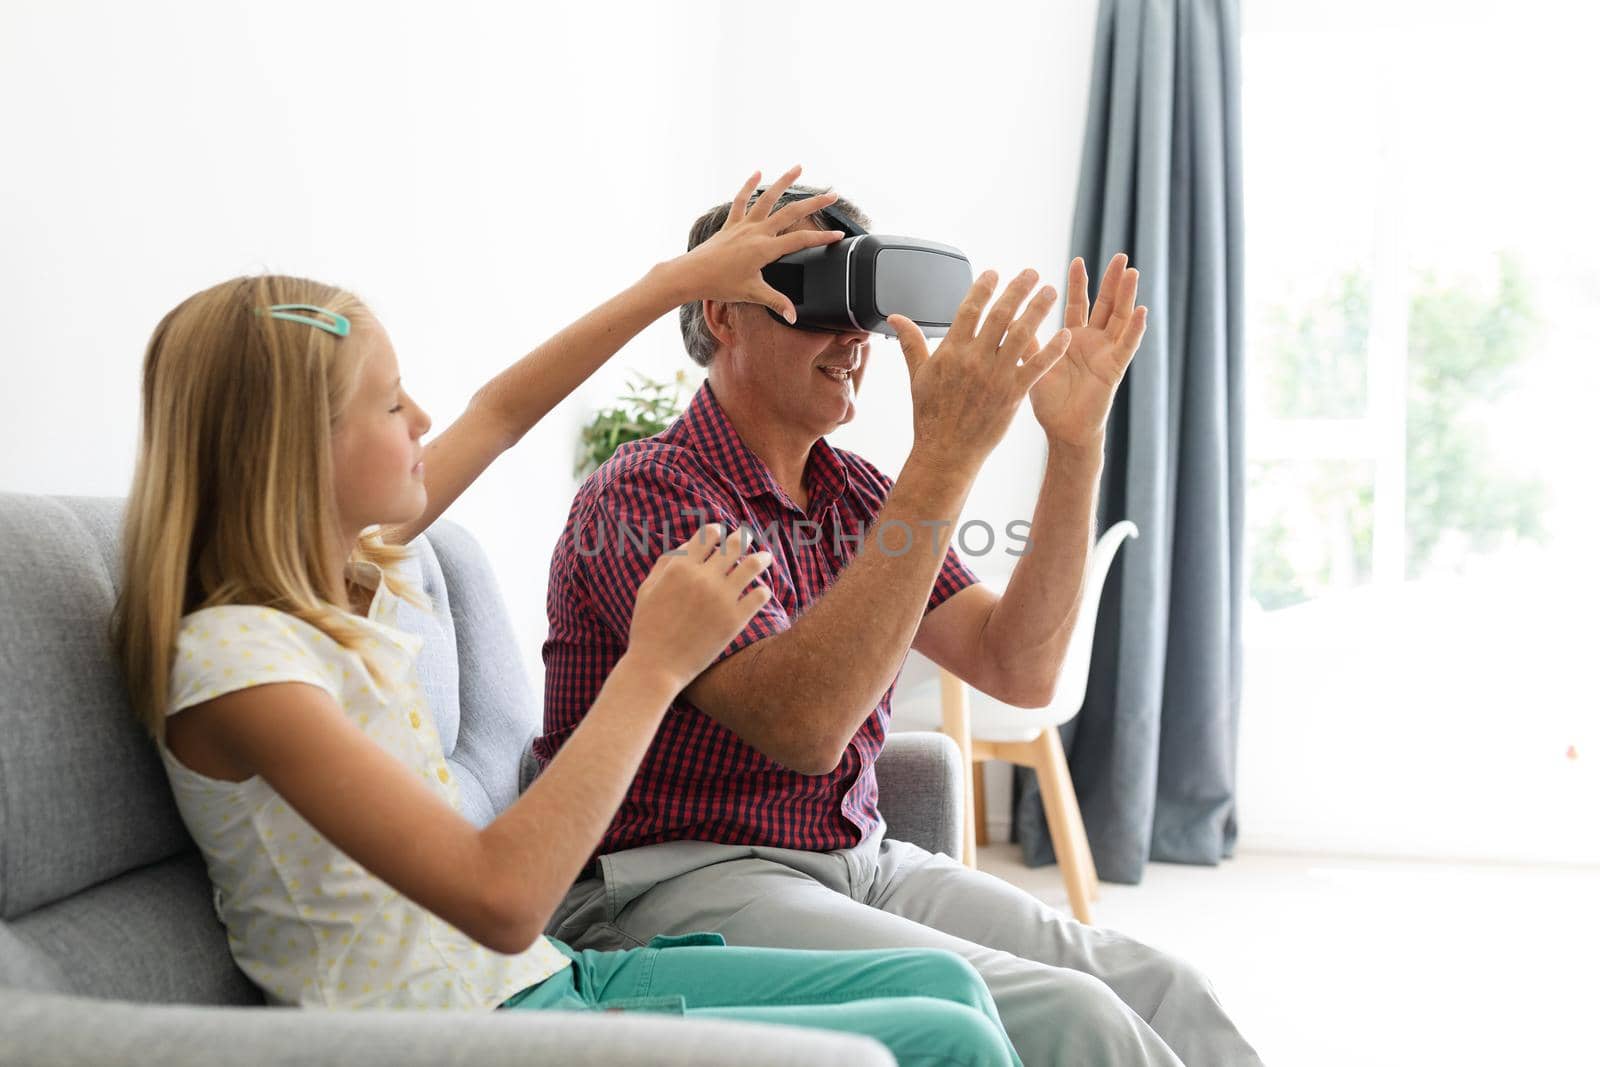 Caucasian granddaughter sitting on couch beside grandfather adjusting his vr headset by Wavebreakmedia